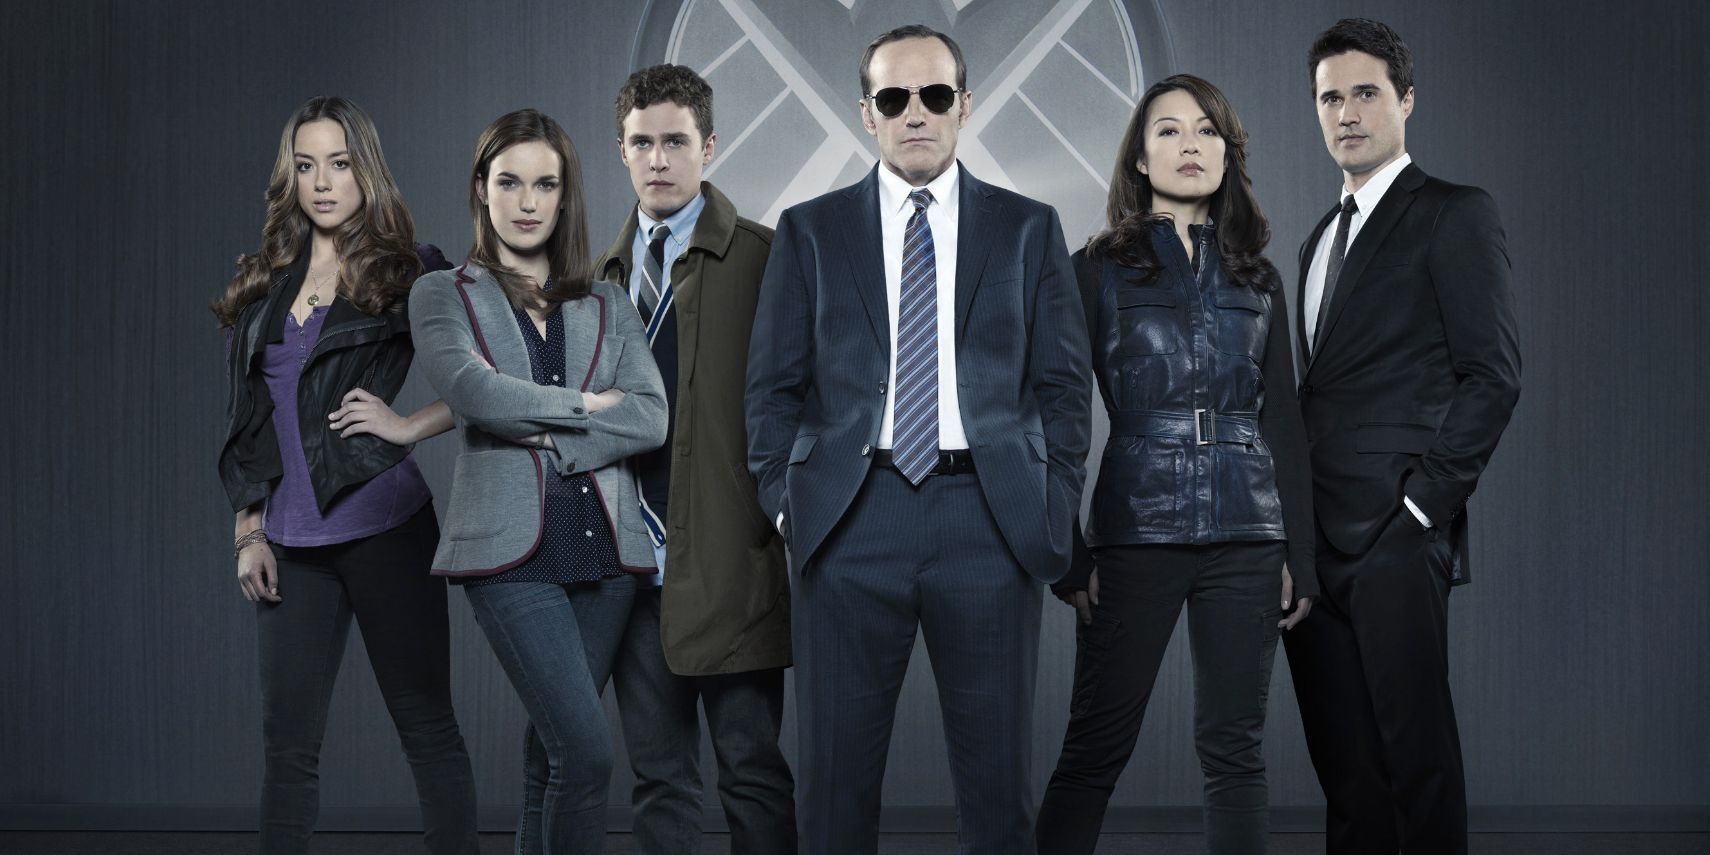 The cast of Marvel's Agents of S.H.I.E.L.D. poses in front of a logo